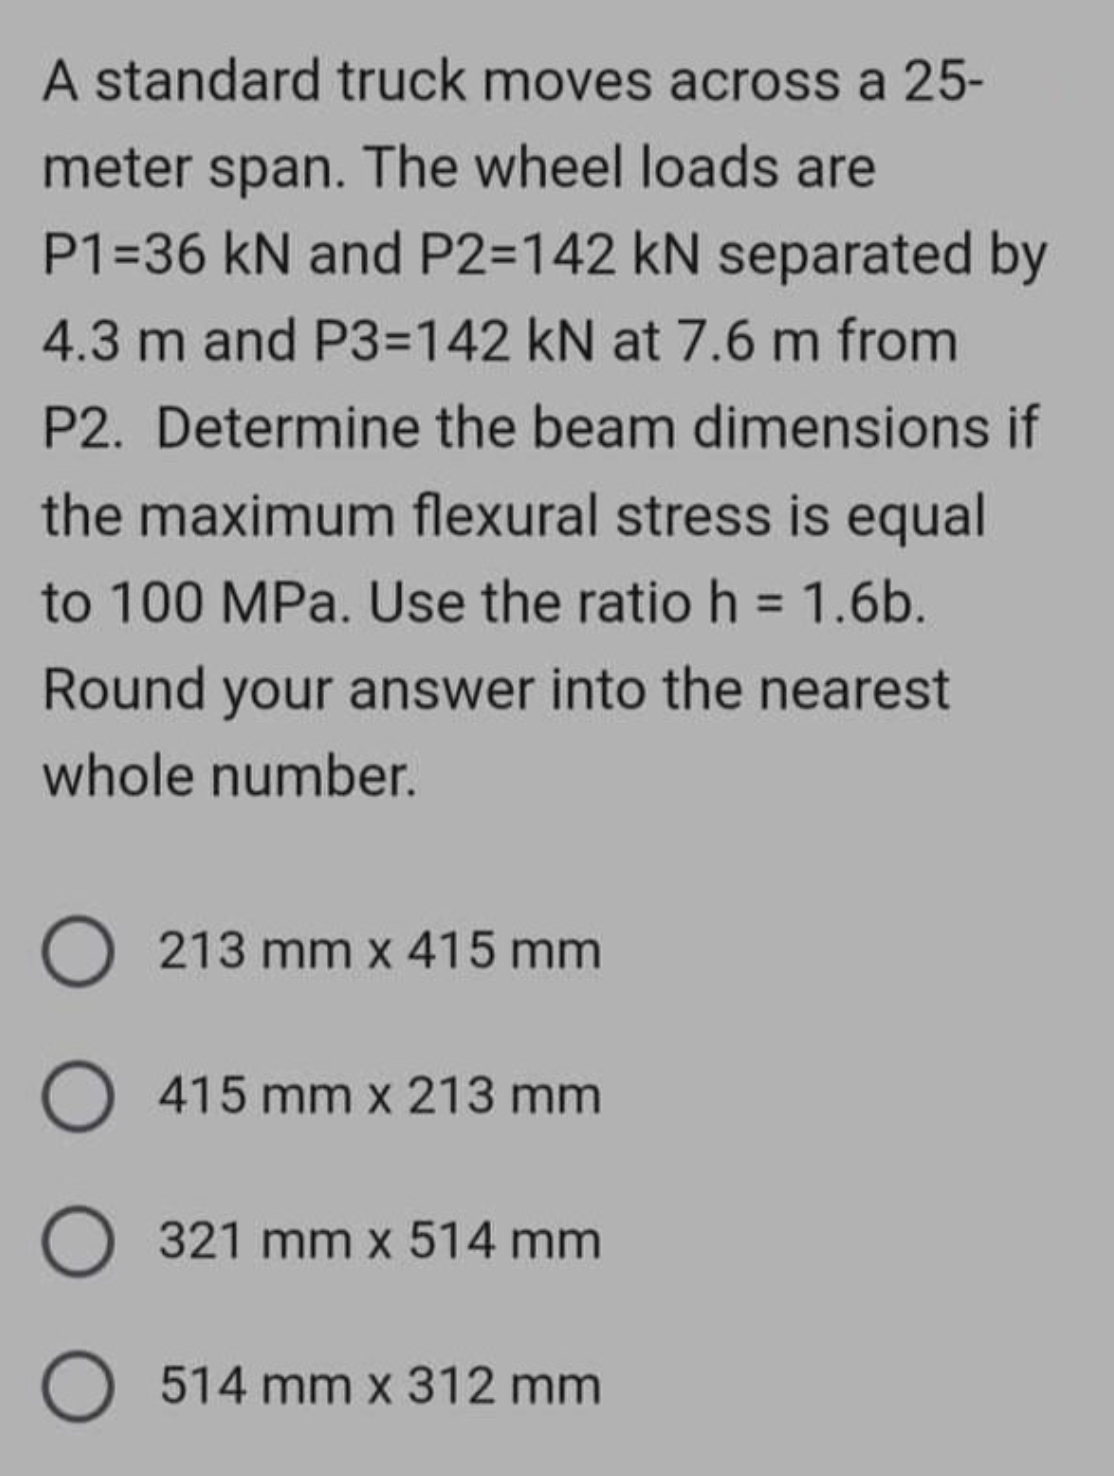 A standard truck moves across a 25-
meter span. The wheel loads are
P1=36 kN and P2=142 kN separated by
4.3 m and P3=142 kN at 7.6 m from
P2. Determine the beam dimensions if
the maximum flexural stress is equal
to 100 MPa. Use the ratio h = 1.6b.
Round your answer into the nearest
whole number.
O 213 mm x 415 mm
O 415 mm x 213 mm
O 321 mm x 514 mm
O 514 mm x 312 mm